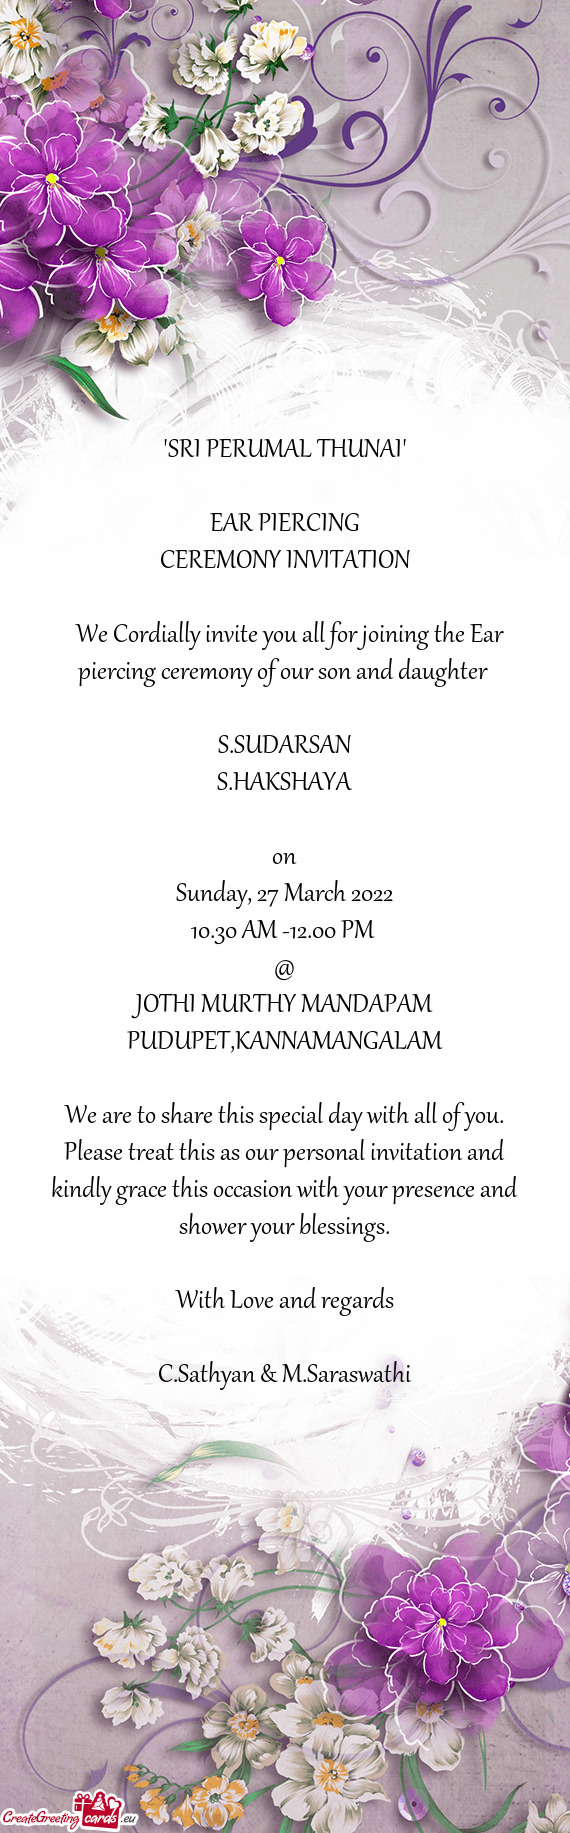 We Cordially invite you all for joining the Ear piercing ceremony of our son and daughter